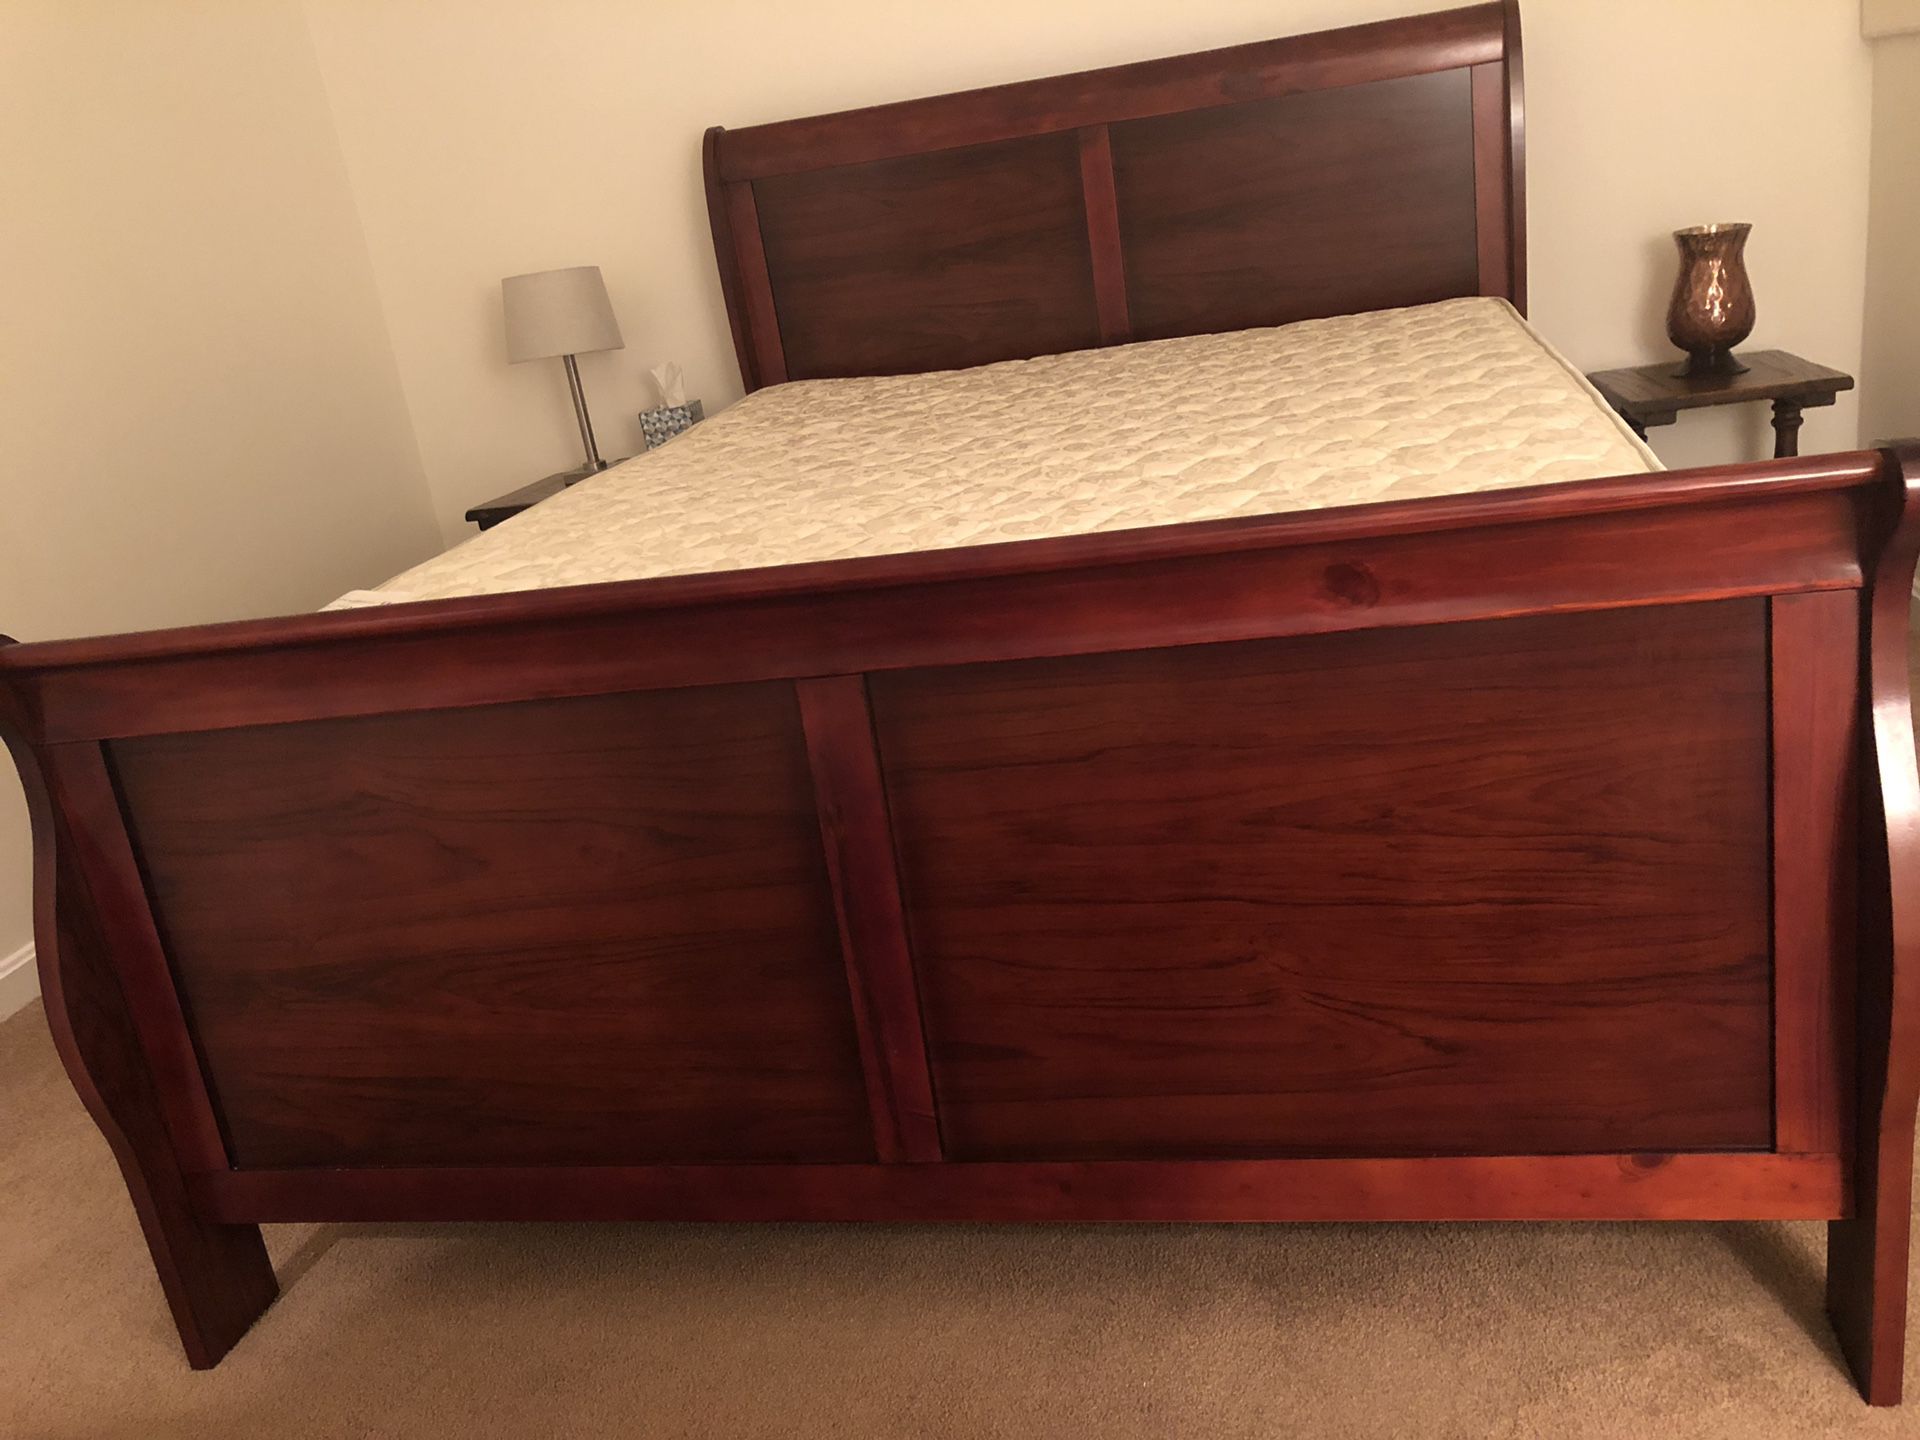 Queen Bed with mattress and box